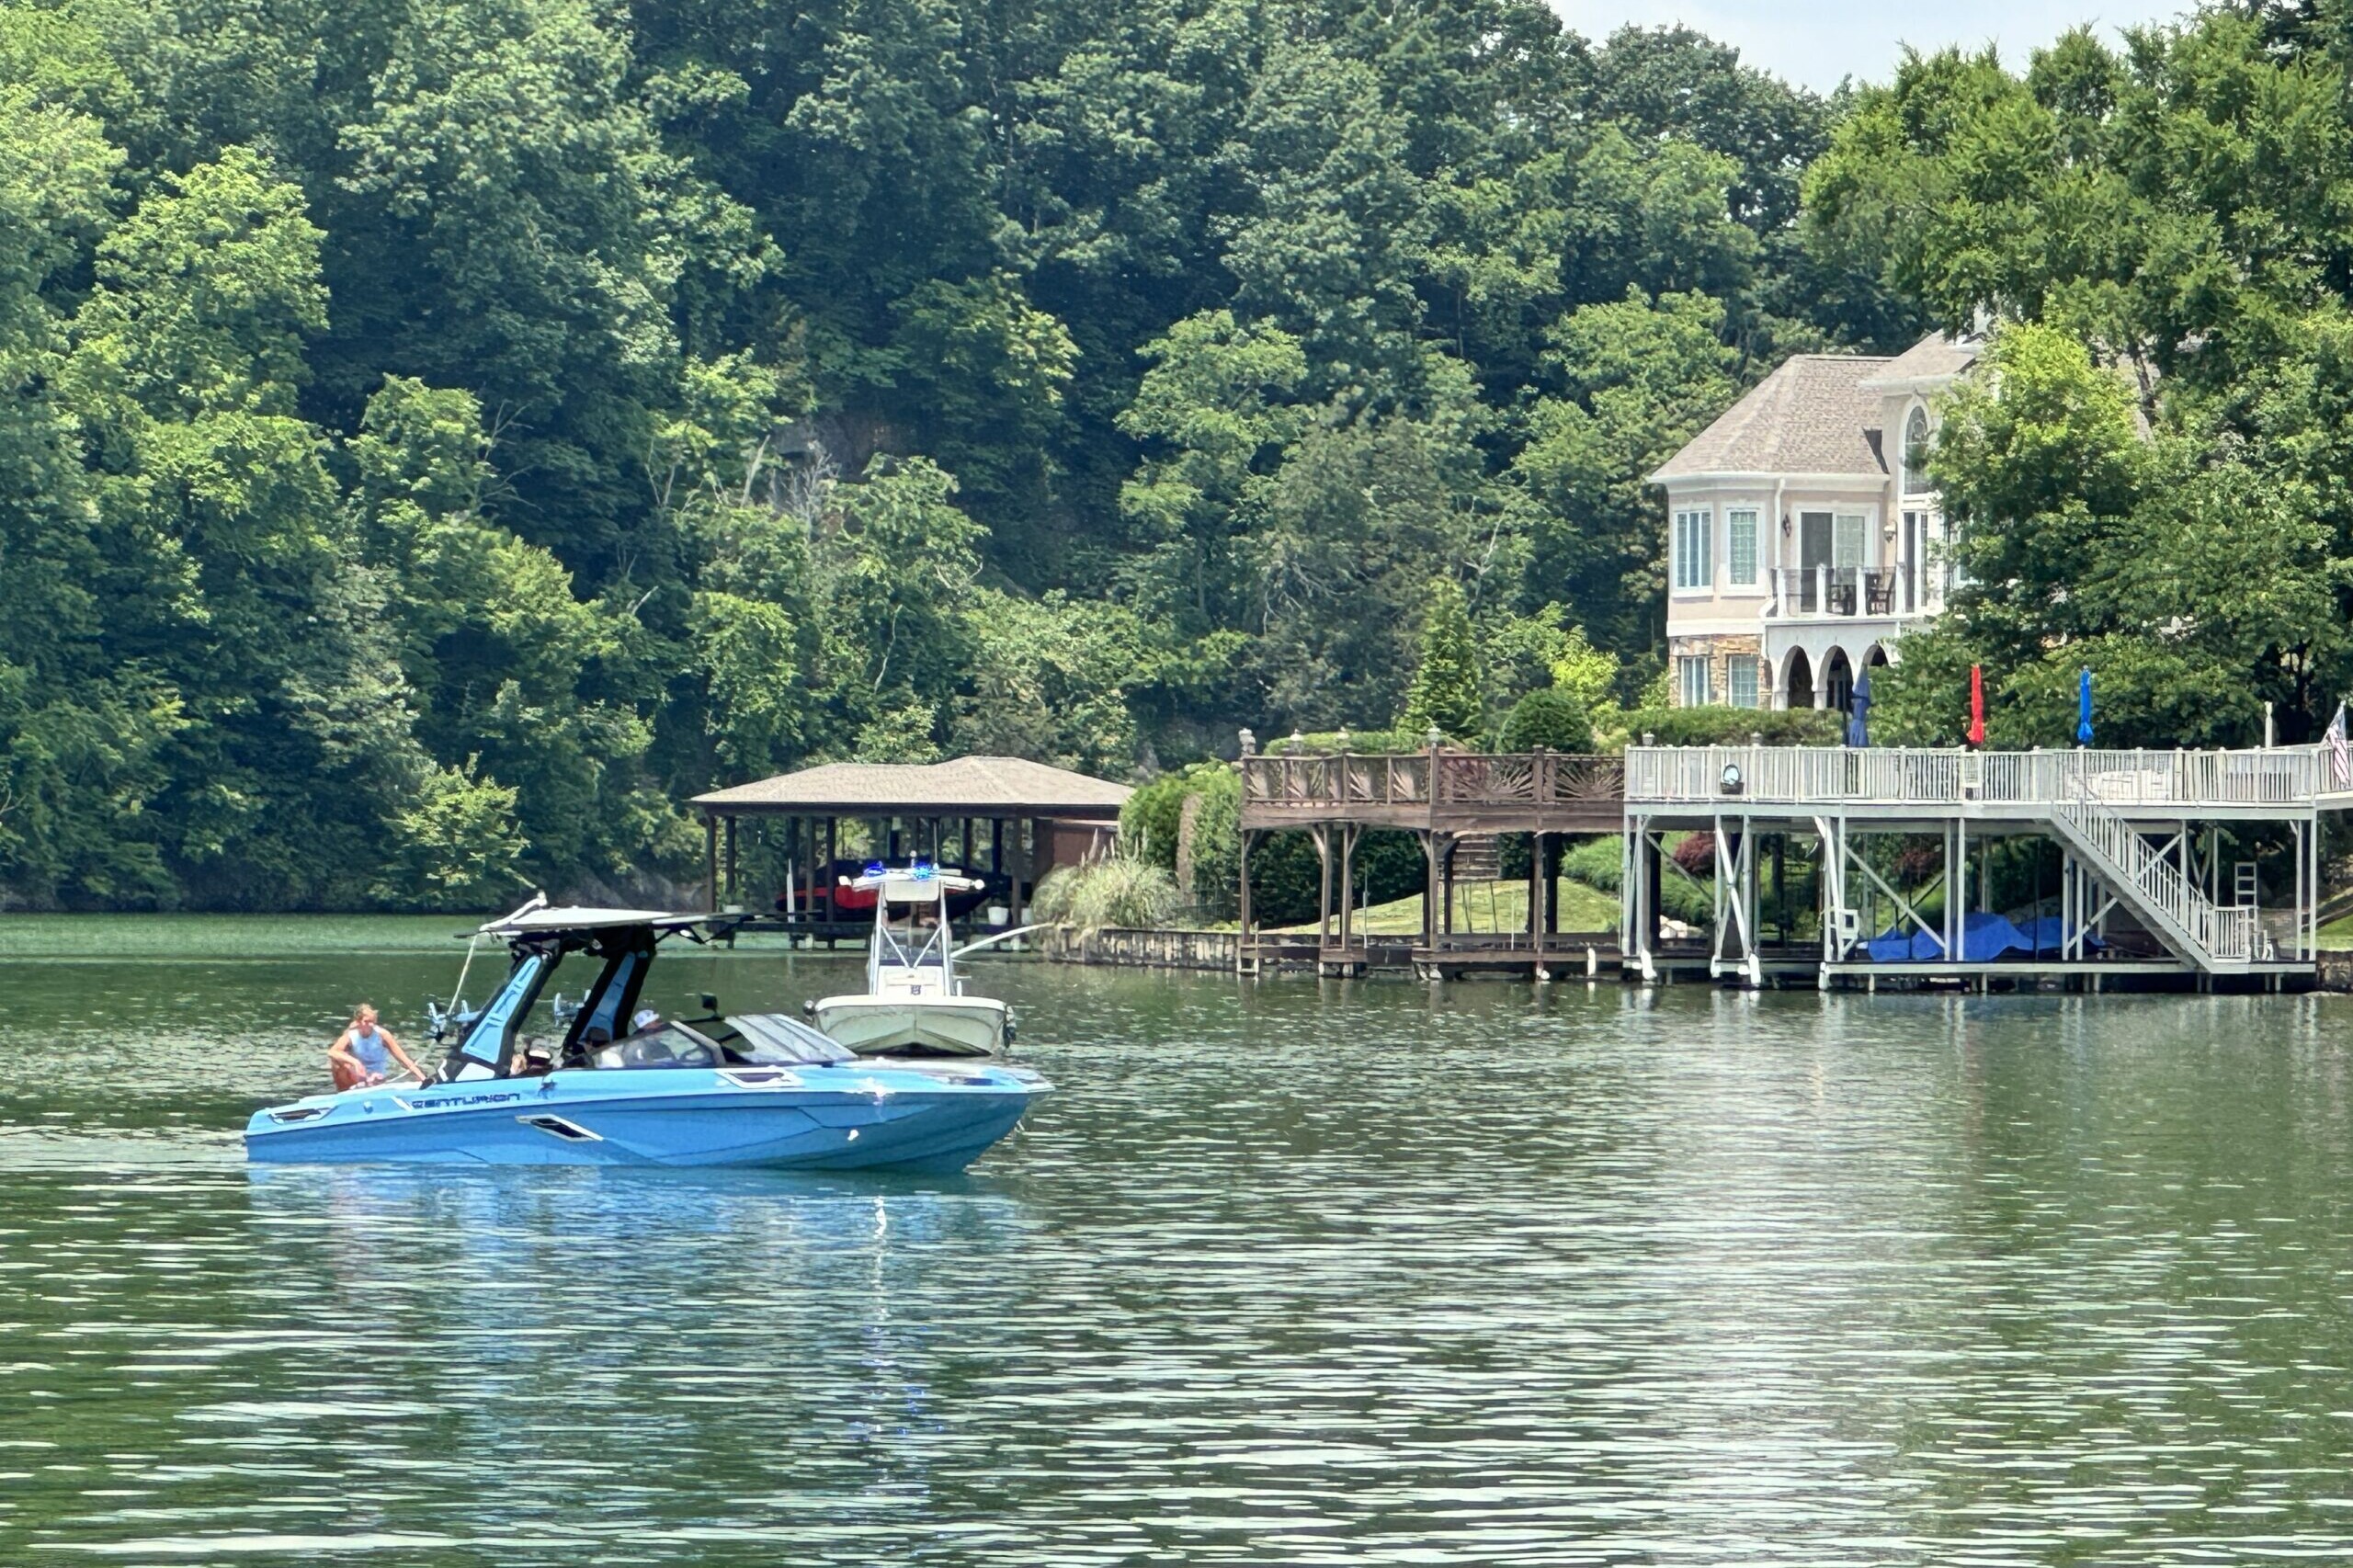 A blue boat with passengers cruises on a lake near a large house with a waterfront deck, surrounded by lush green trees. Nearby, CBK Watersports enthusiasts recall the excitement of the Centurion WSWS Volunteer Wake Surf Classic's Day 1 Recap.